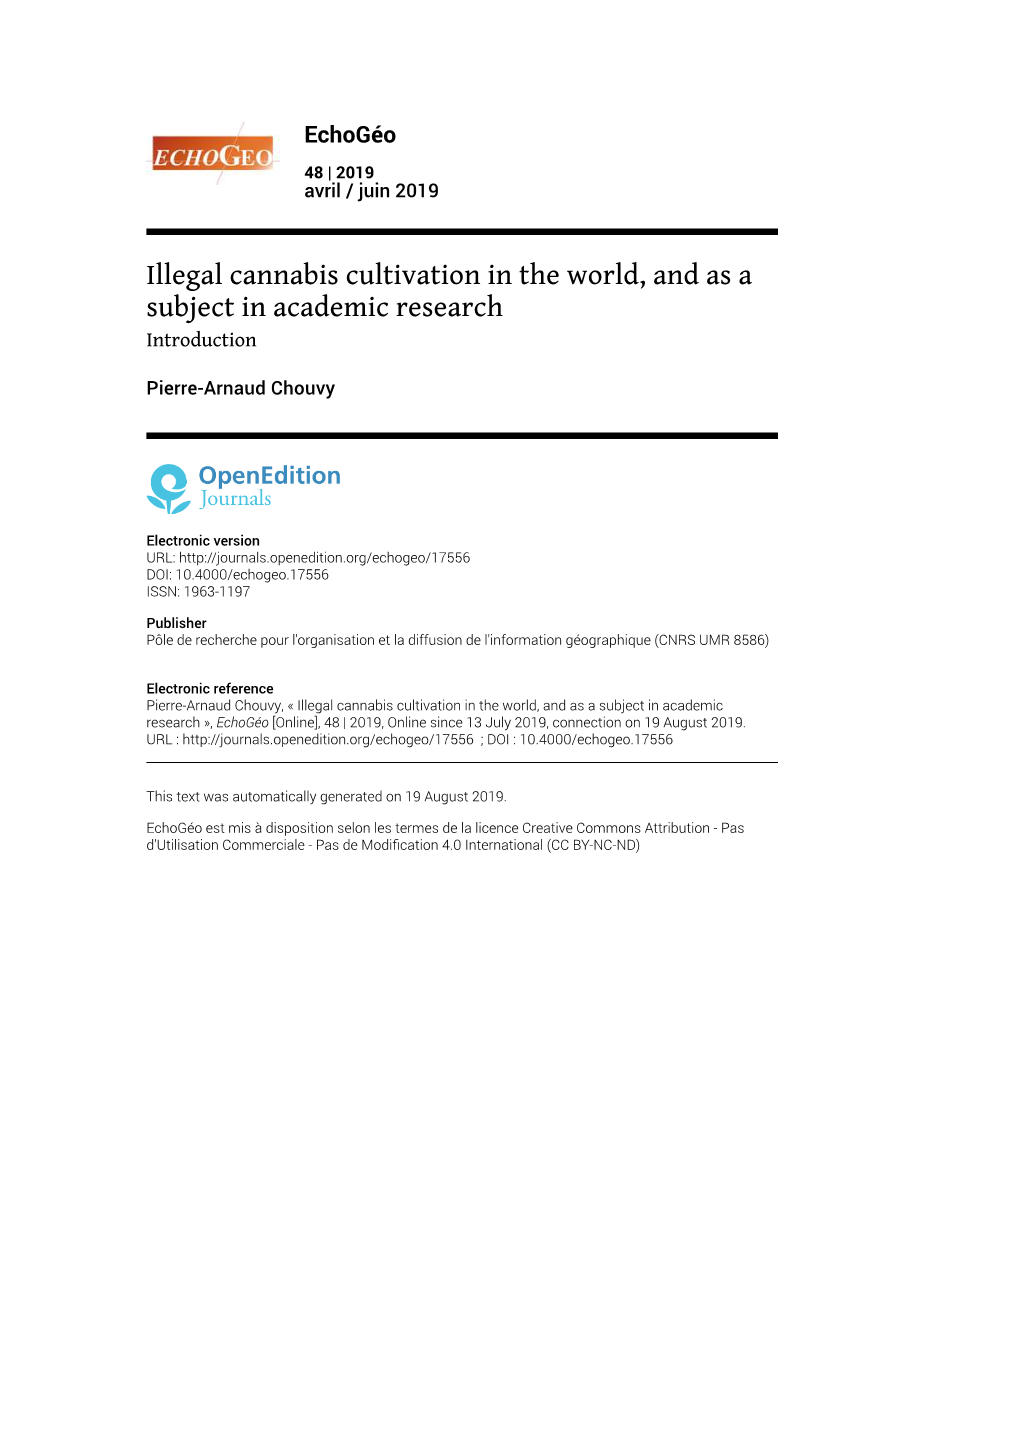 Echogéo, 48 | 2019 Illegal Cannabis Cultivation in the World, and As a Subject in Academic Research 2